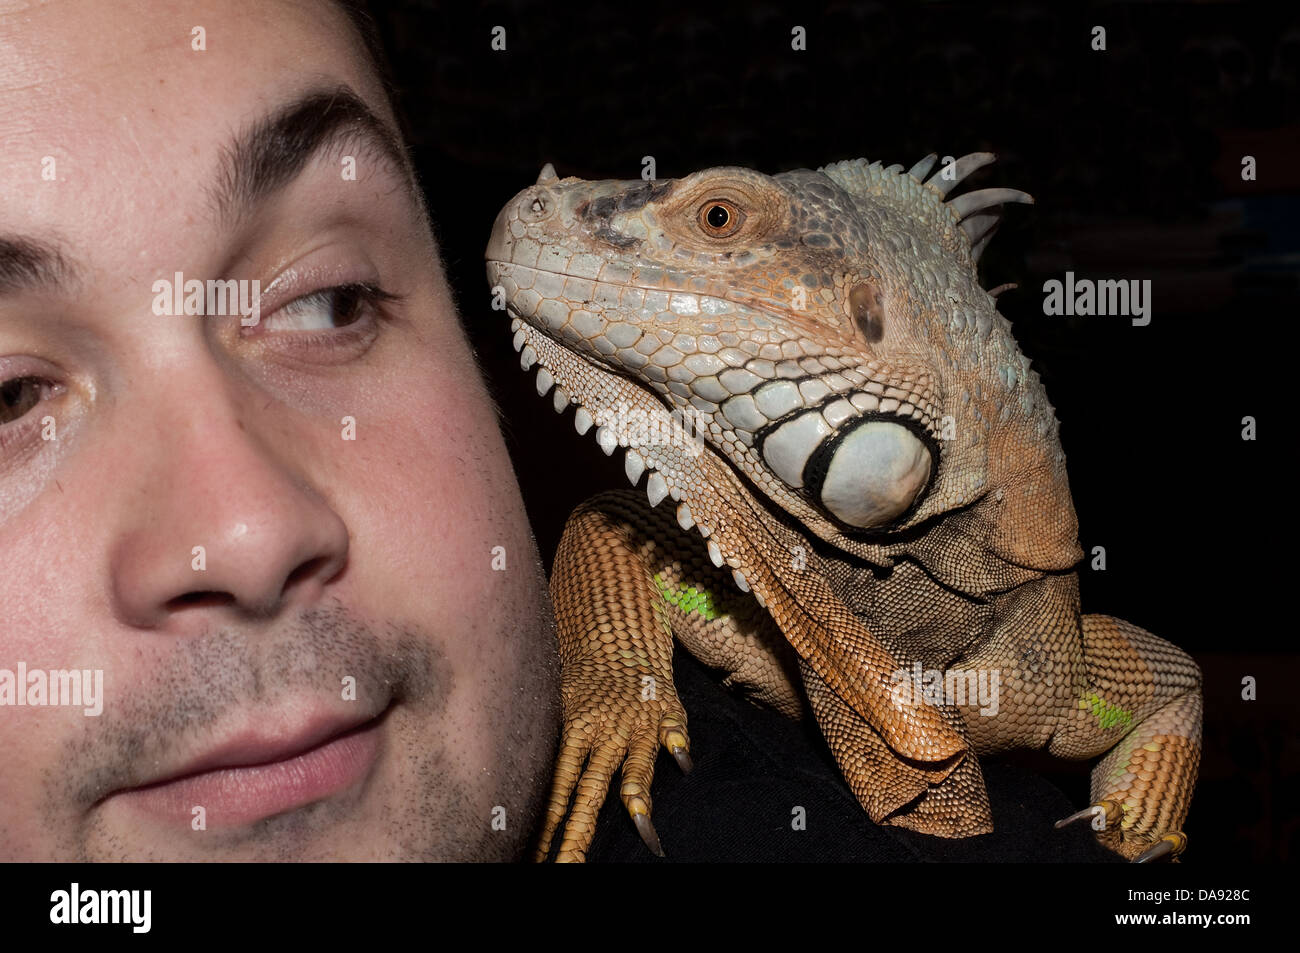 head shot of man with Iguana, looking at each other against black background Stock Photo